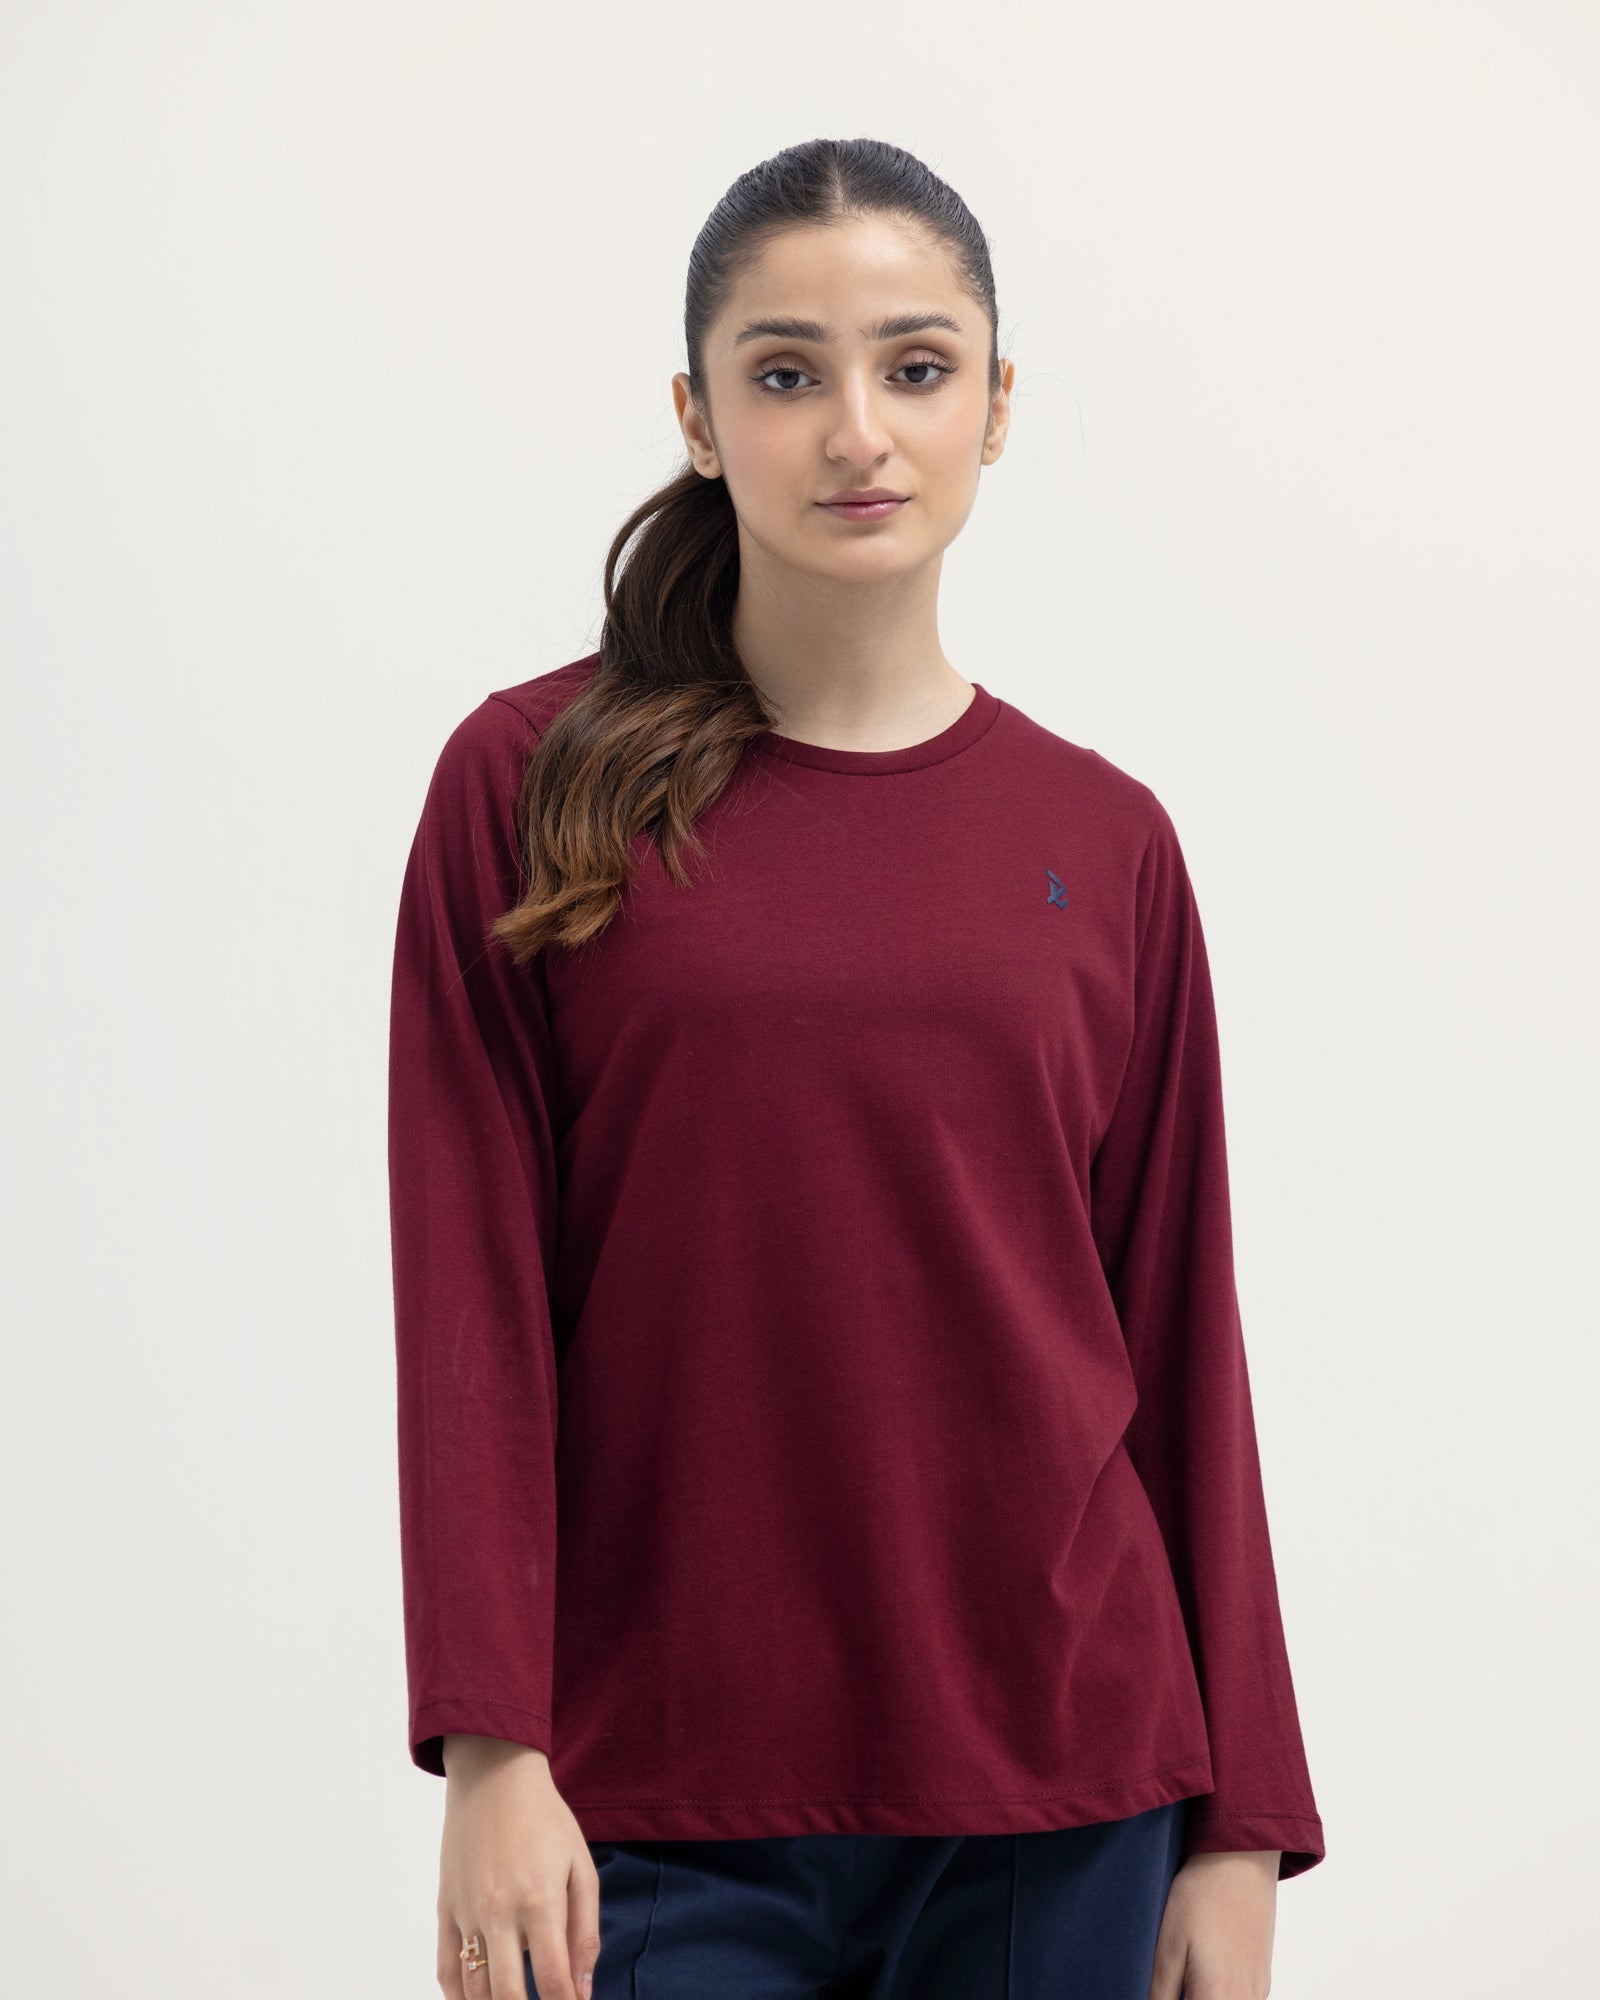 Women's Tees and Knit Tops